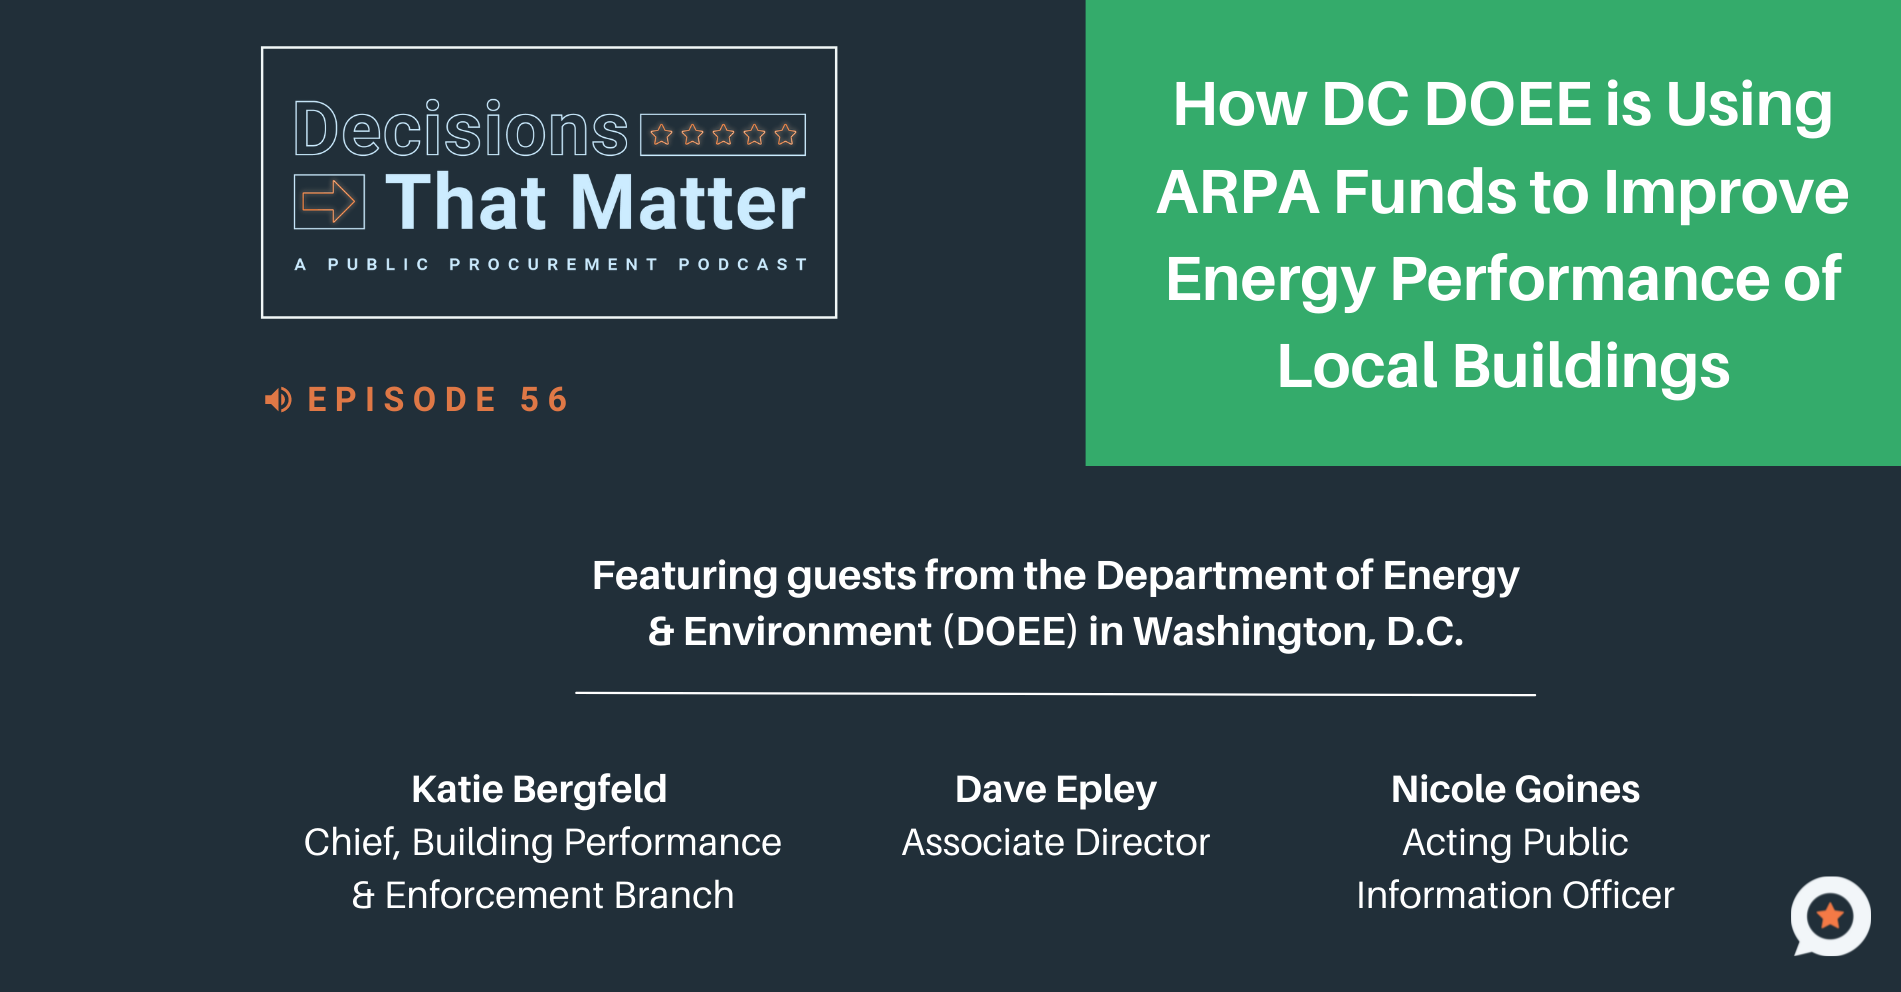 Ep. 56 - How DC DOEE is Using ARPA Funds to Improve Energy Performance of Local Buildings